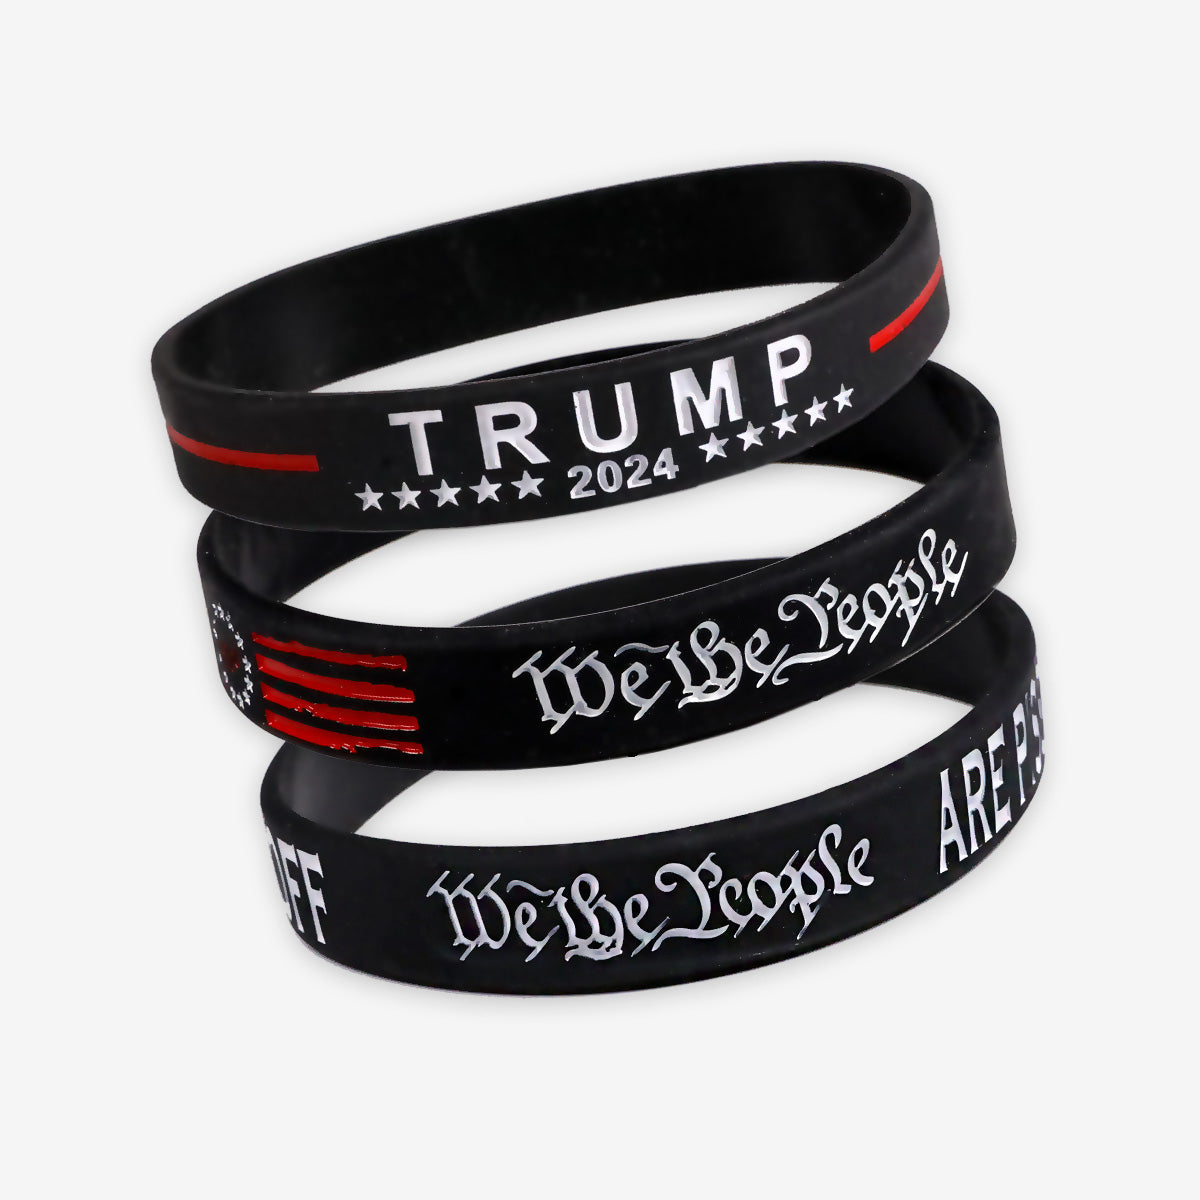 (3 Pack) Trump 2024 Silicone Wristband Bracelet - We The People